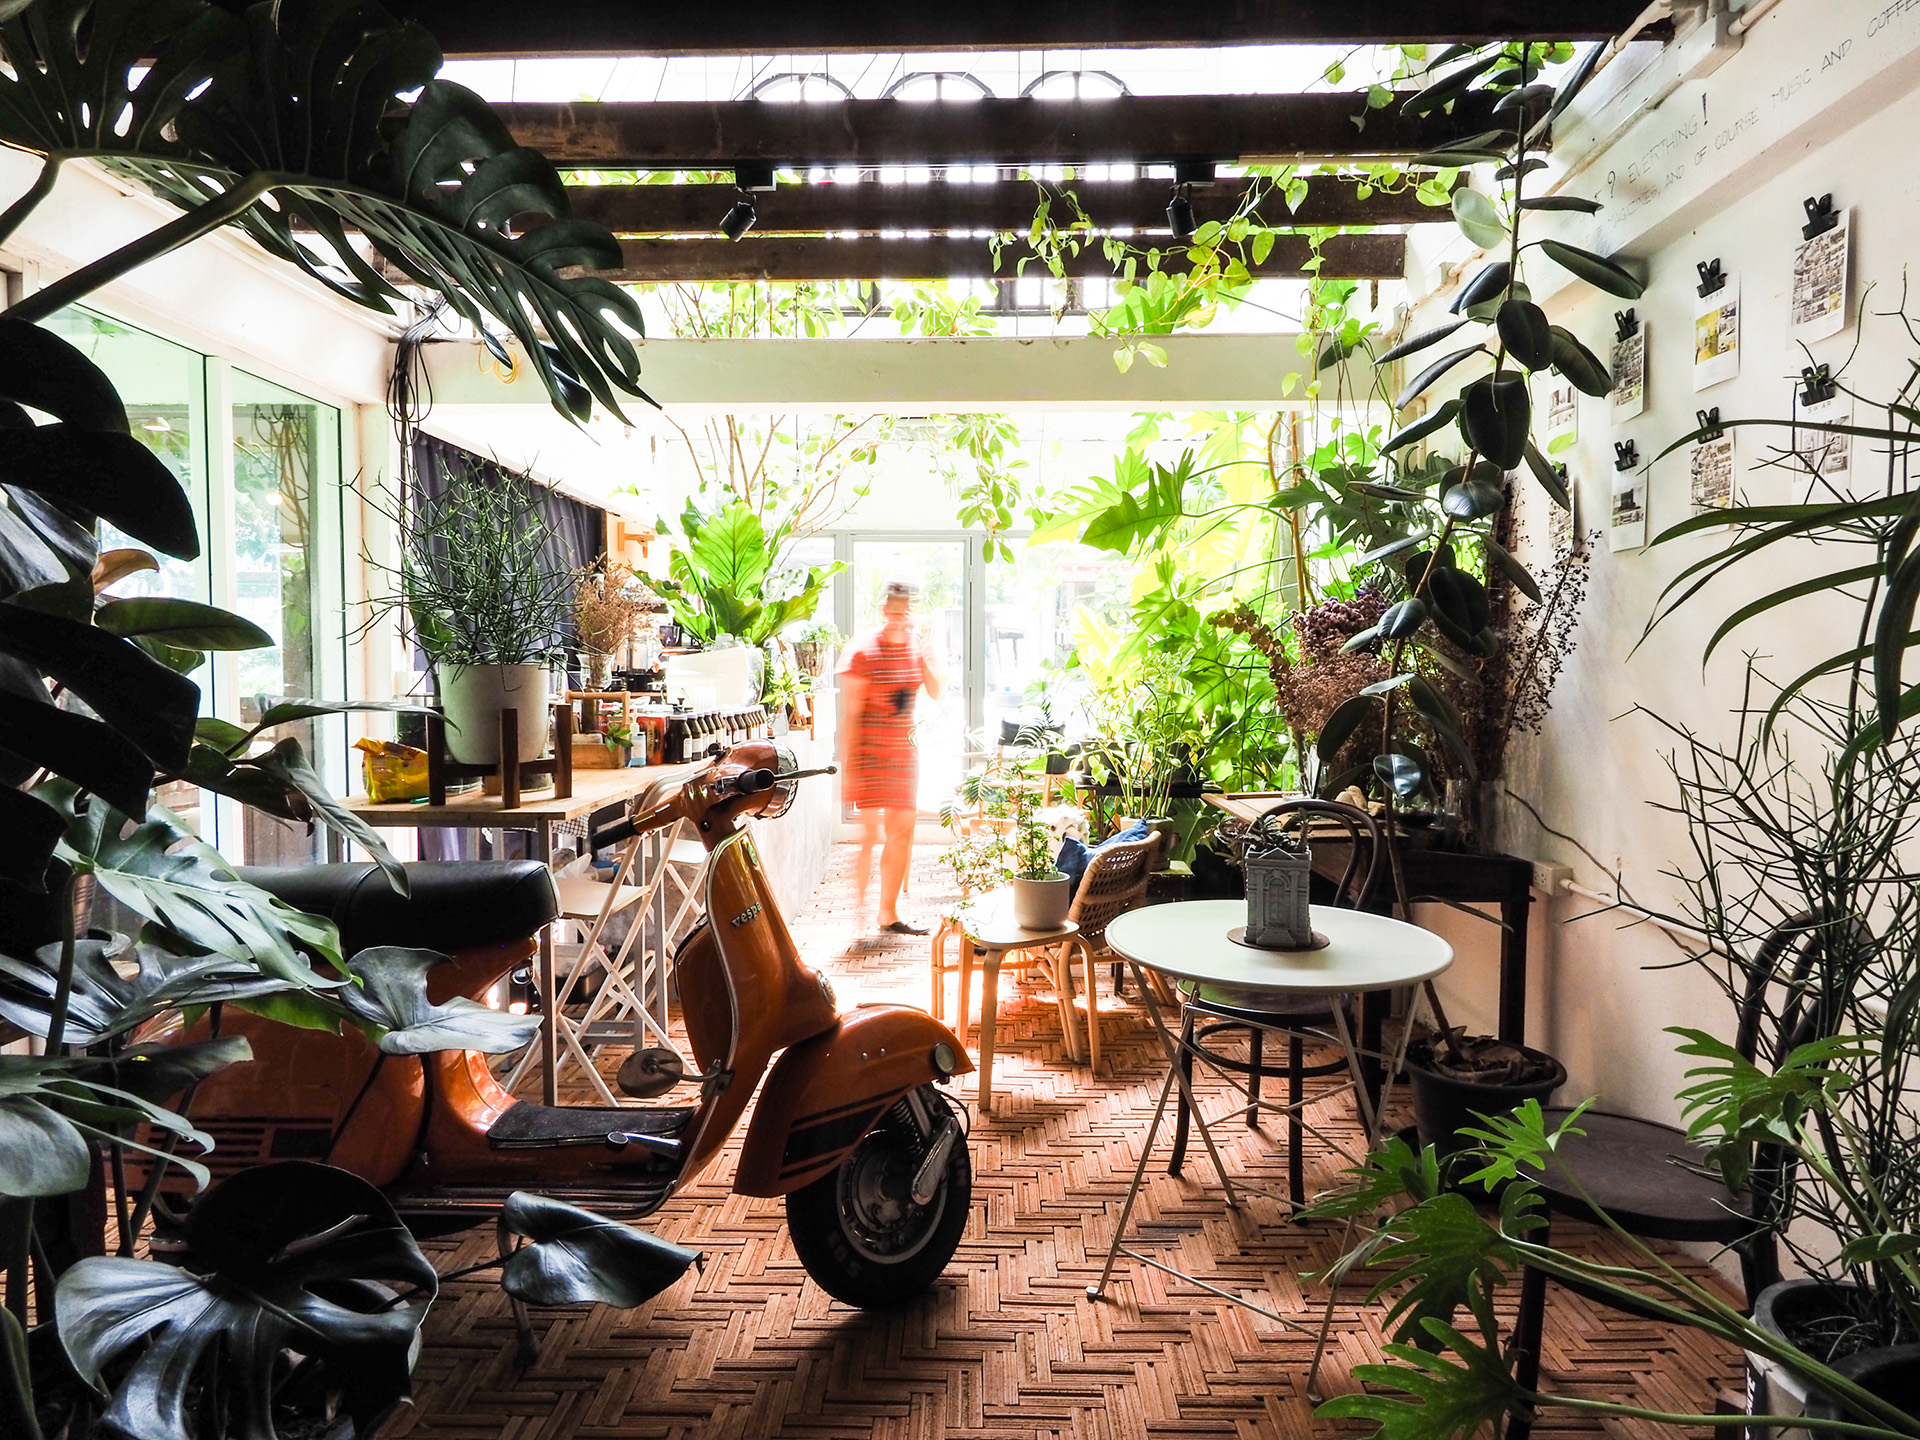 Too Can Cafe, trees and plants: indoors or outdoors?